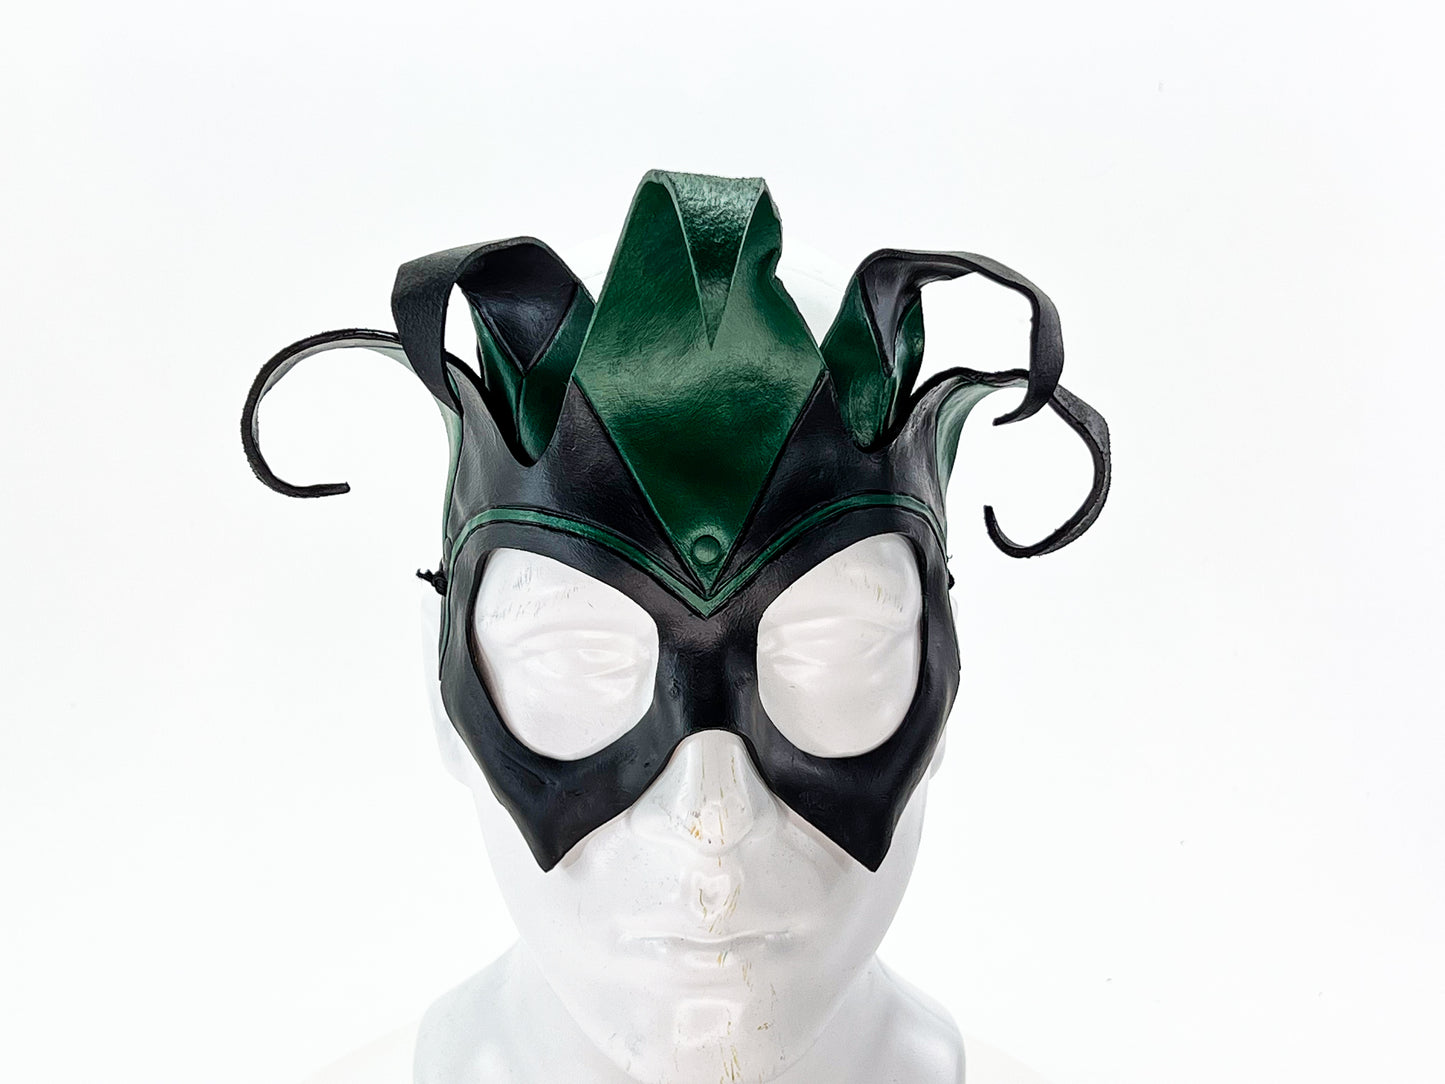 Handmade Genuine Leather Five Point Jester Mask in Green and Black No Bells